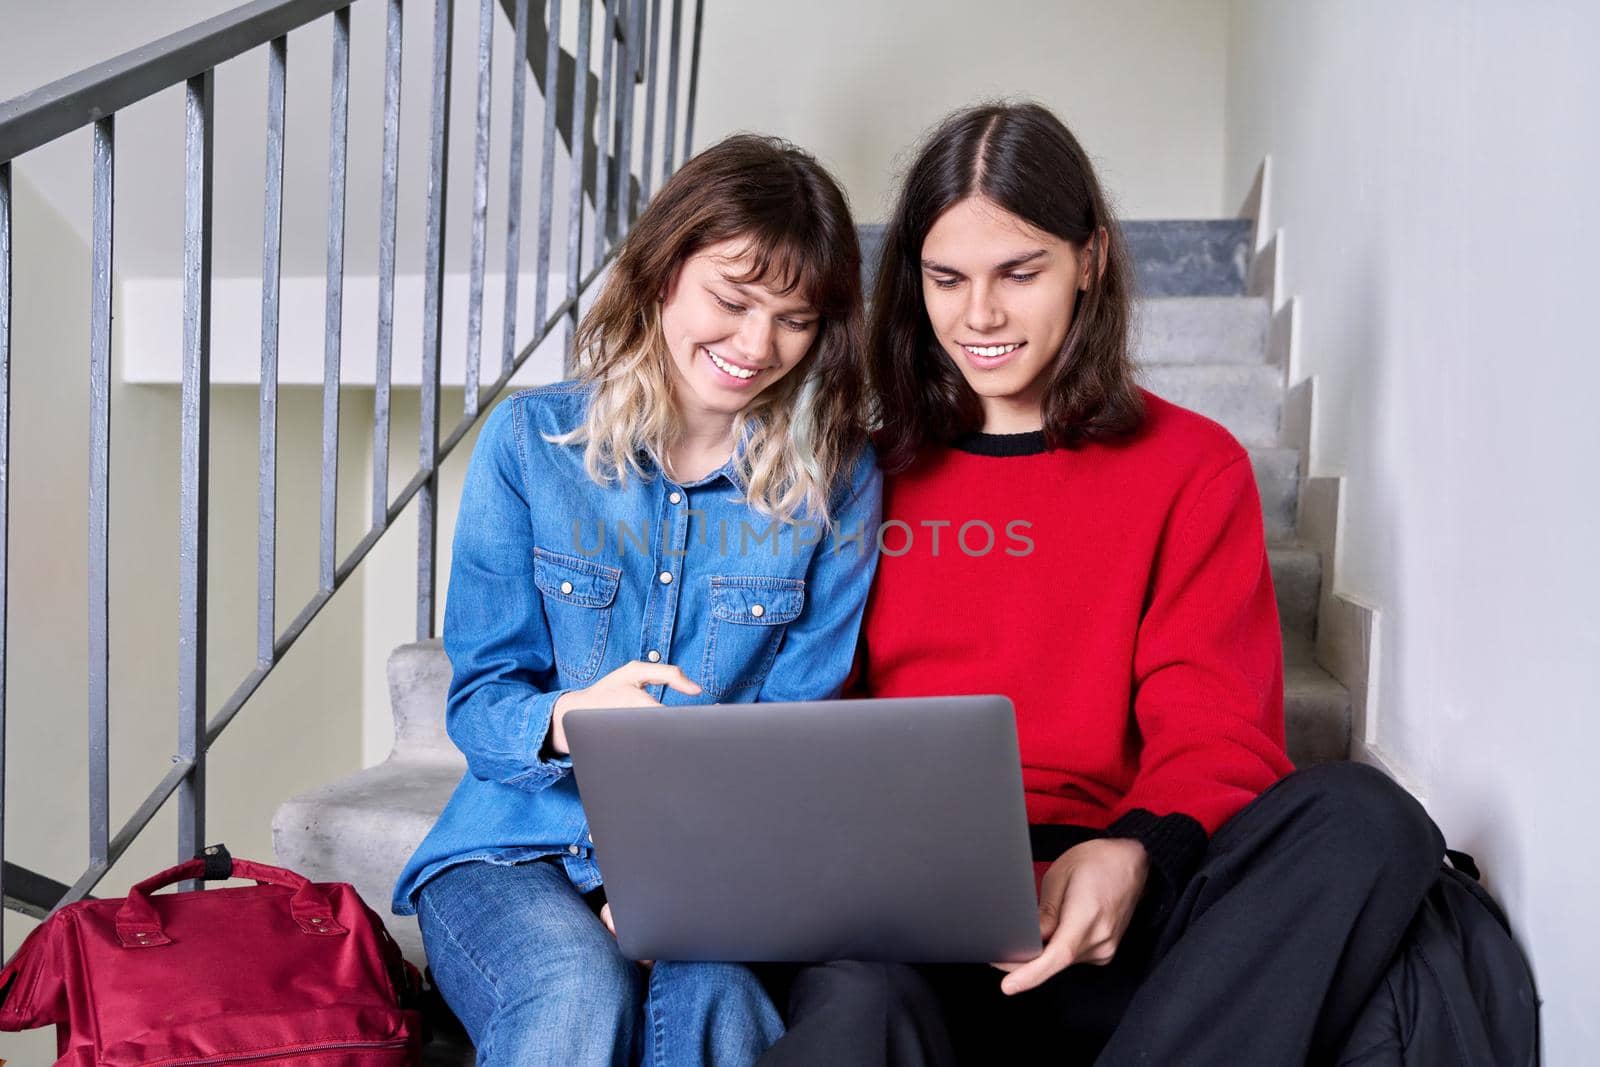 Teenage couple of friends students looking at laptop together. Teenagers male and female with backpacks sitting on the stairs inside the building. Youth, lifestyle, technology, young people concept